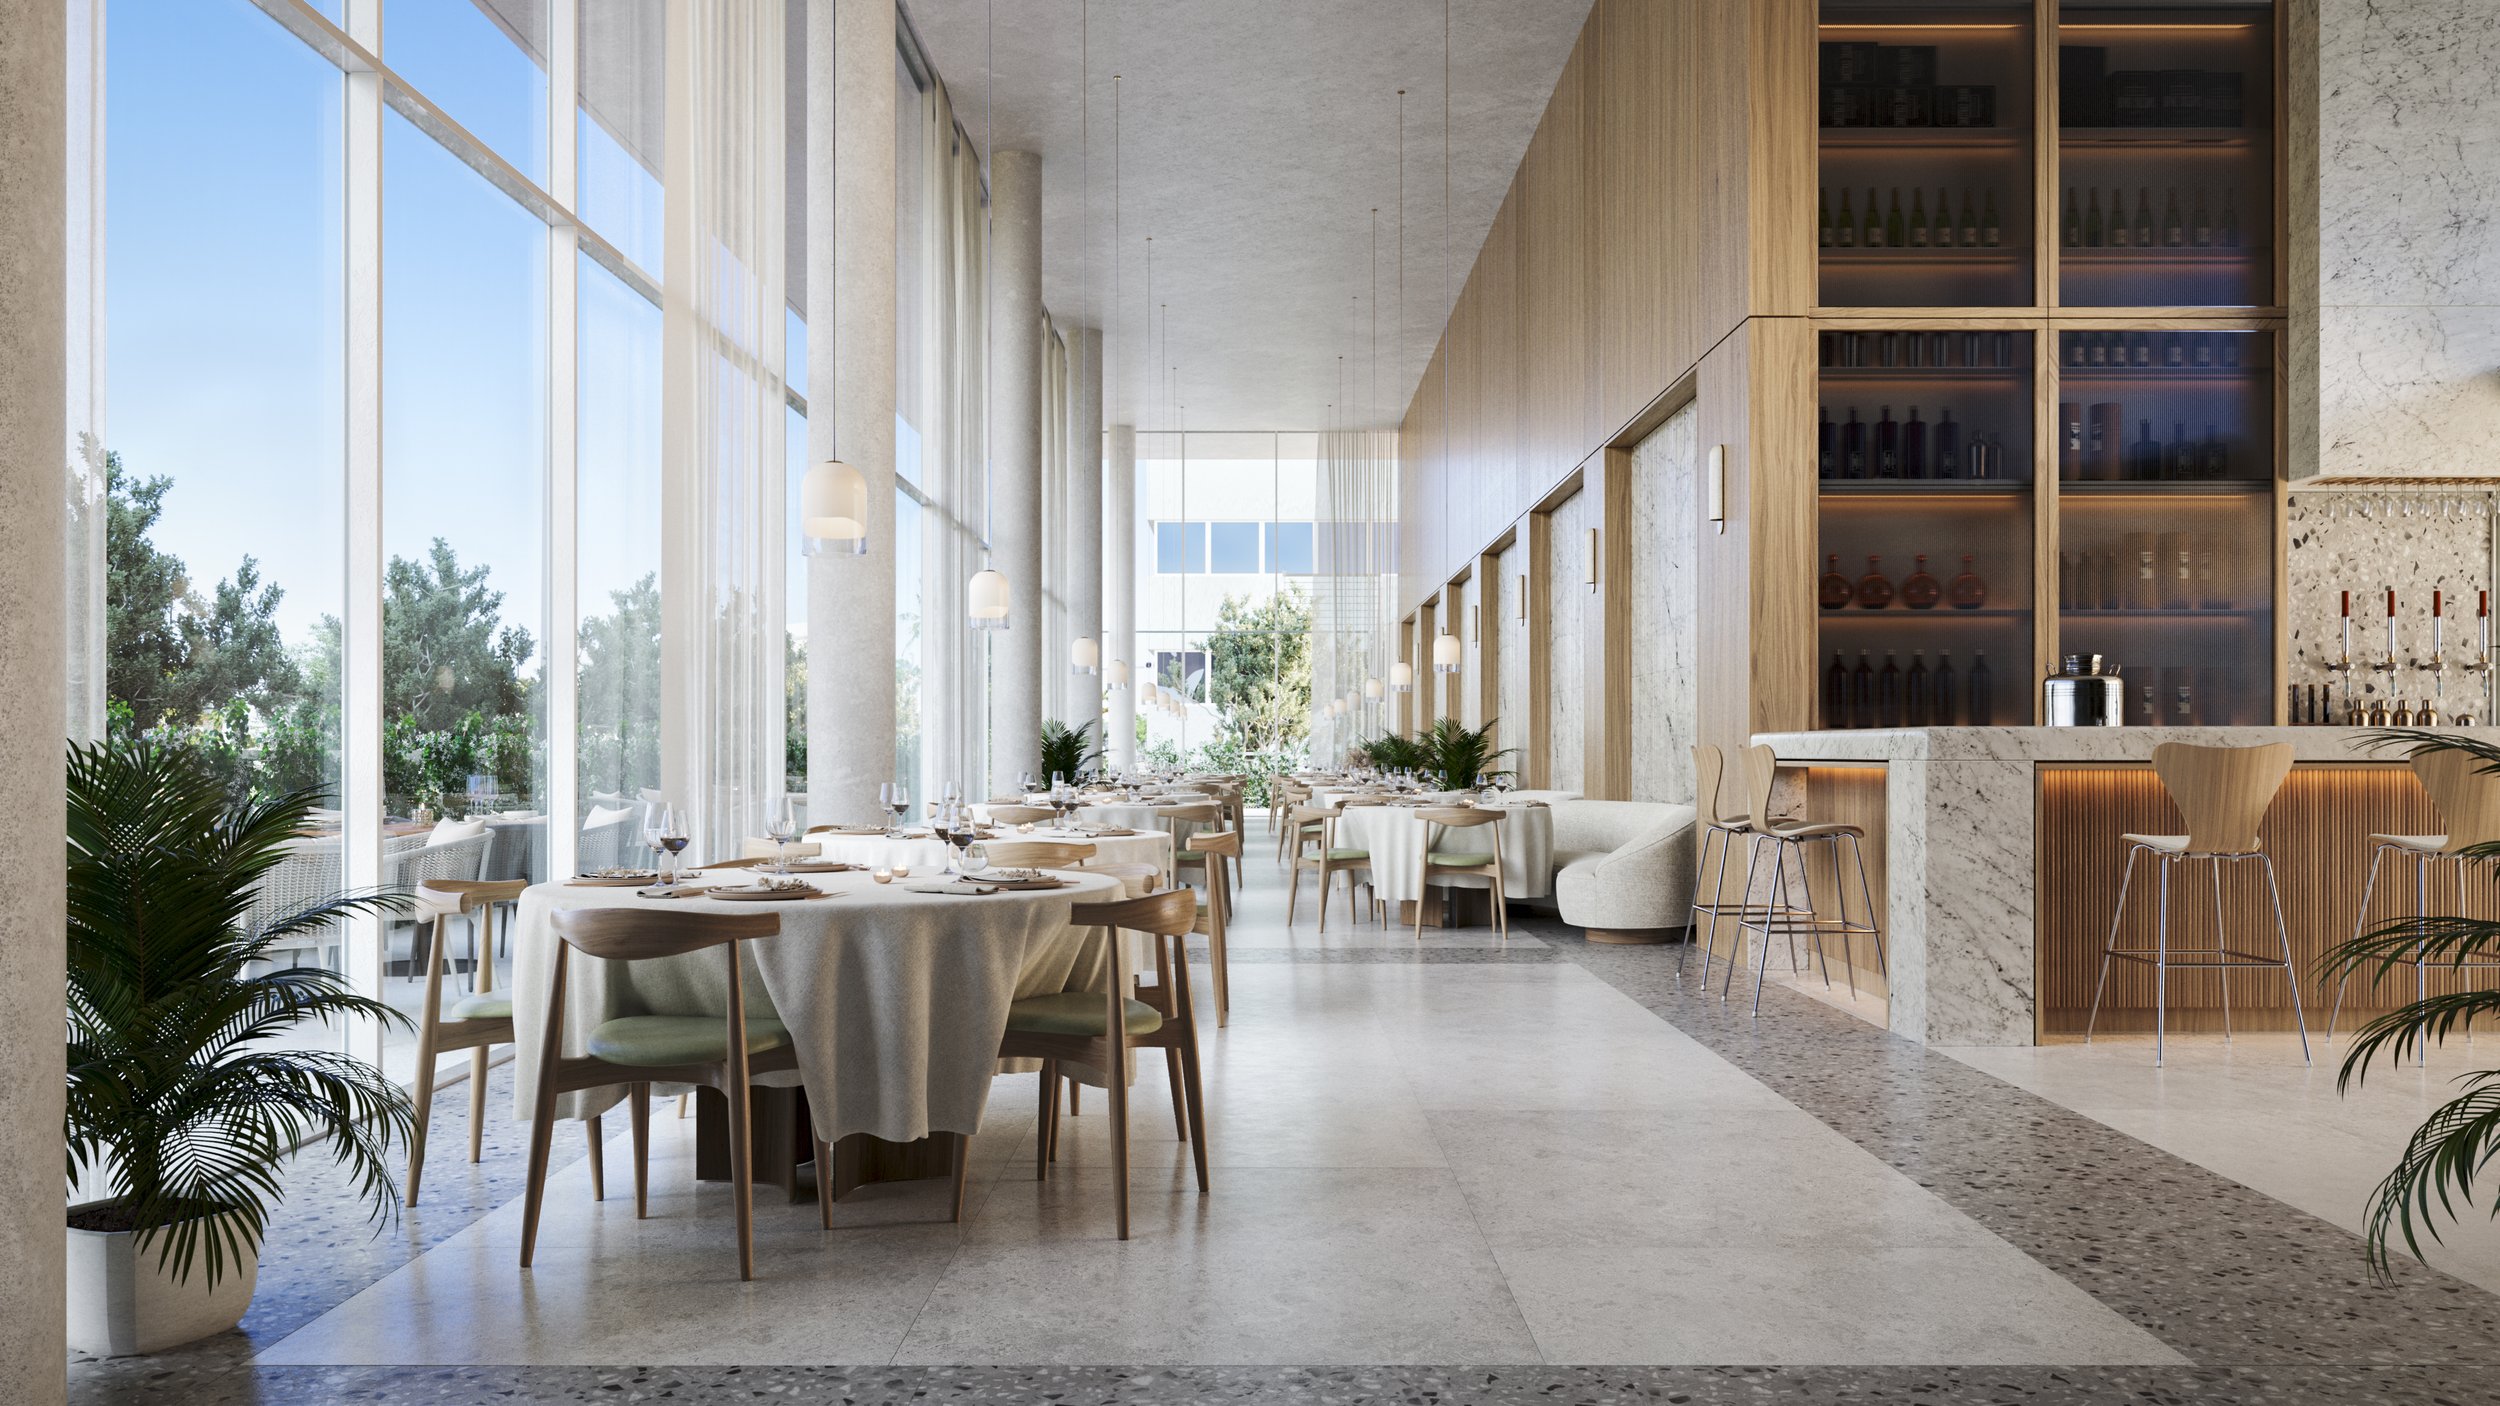 World-Renowned Spanish Master Architect Albert Campo Baeza's First U.S. Commercial Building THE FIFTH MIAMI BEACH To Launch Leasing And Break Ground 13.jpg